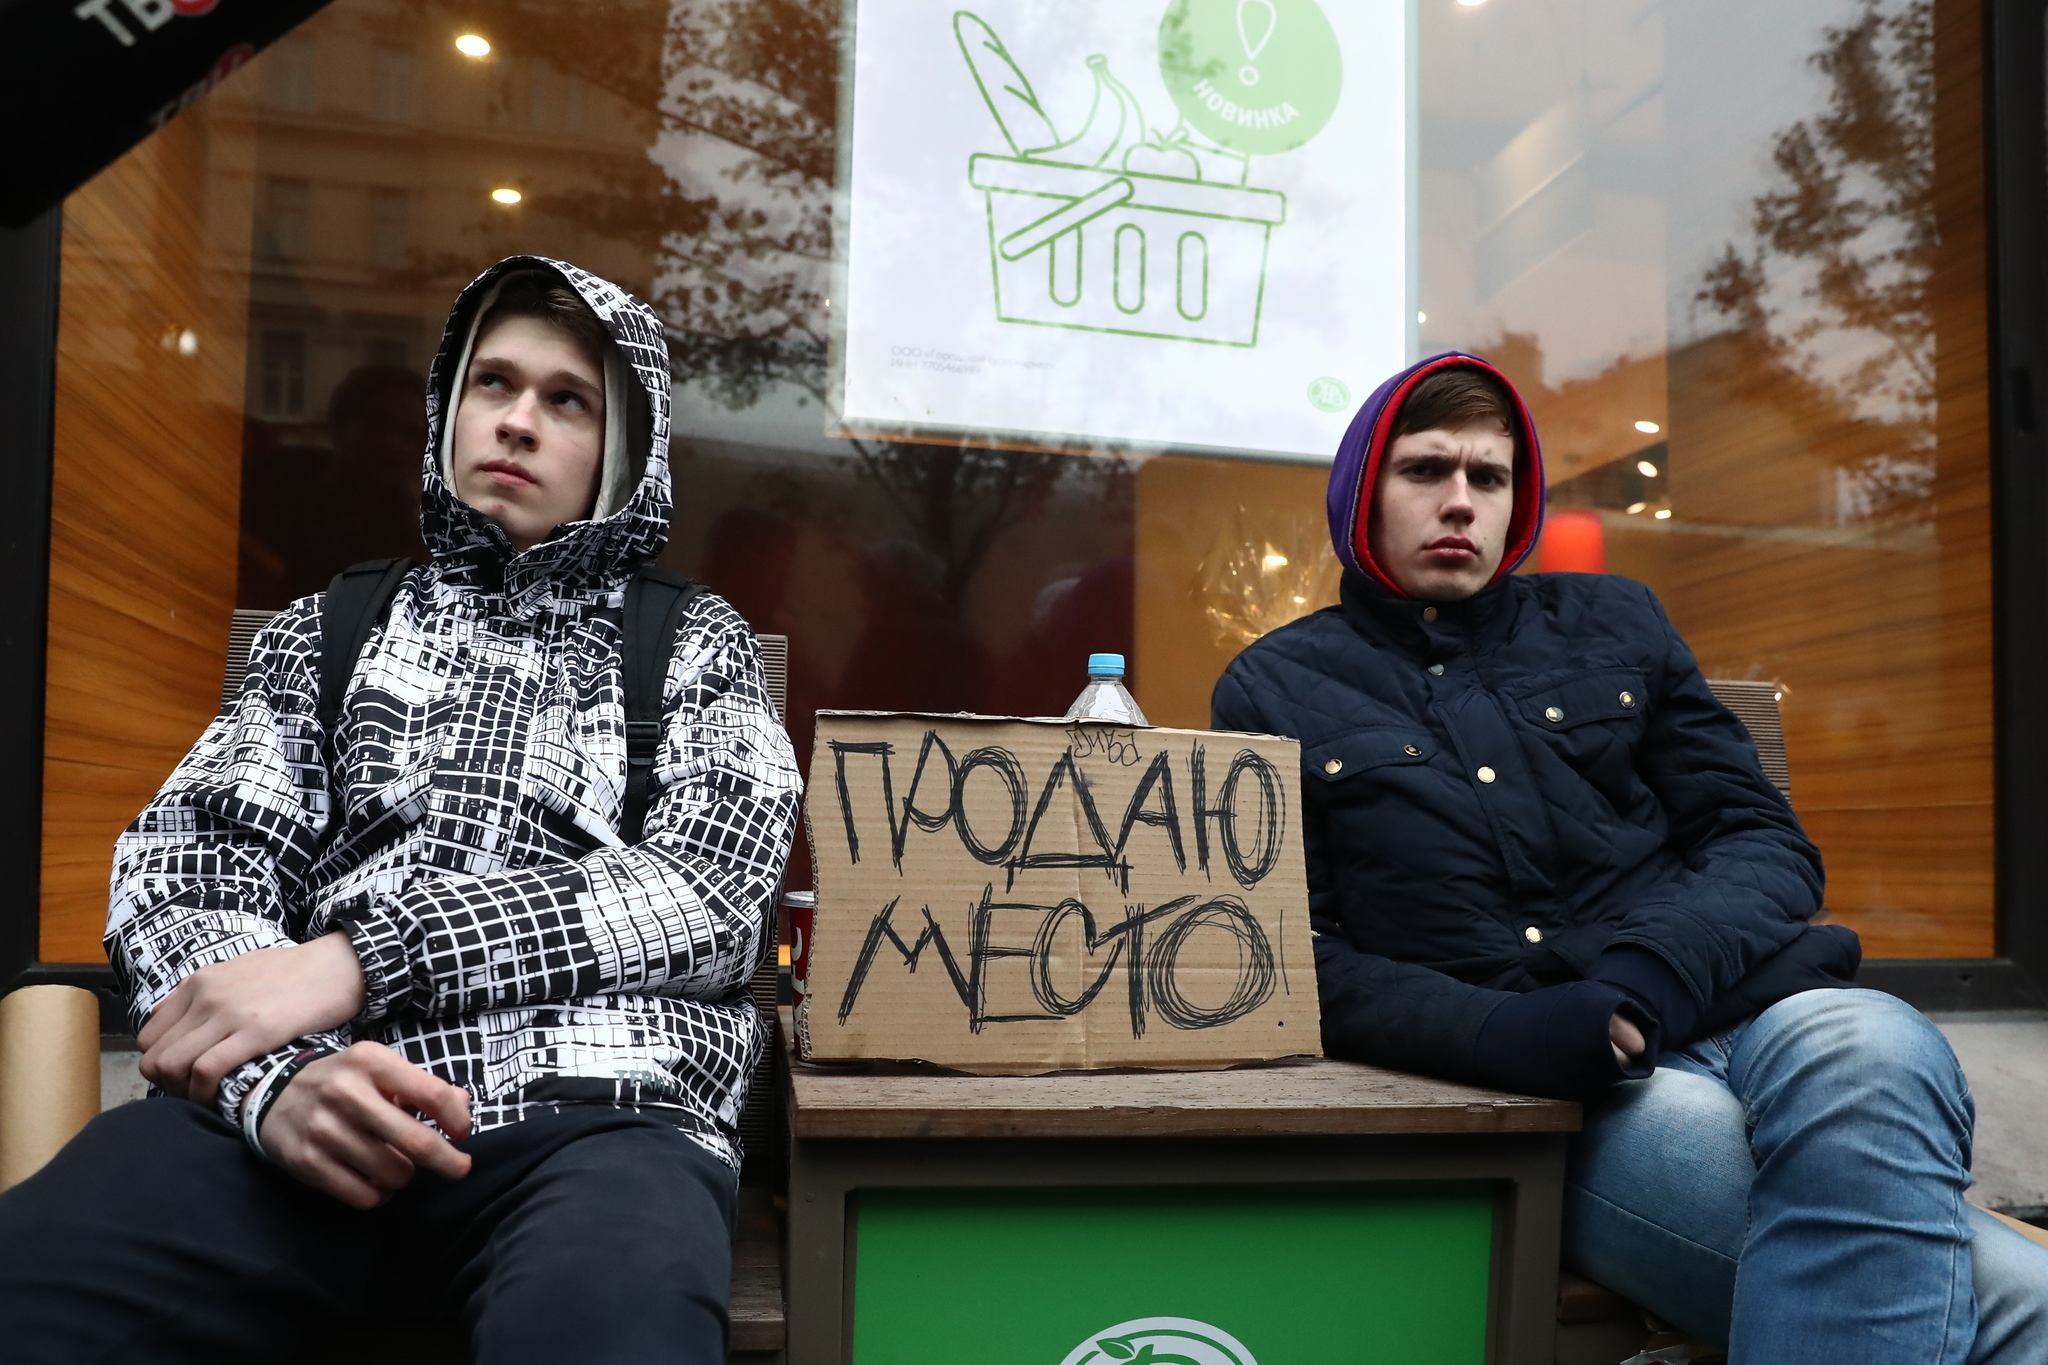 Places in the queue for the new iPhone are sold for 20-400 thousand rubles. - My, Apple, iPhone, Smartphone, Longpost, iPhone 11